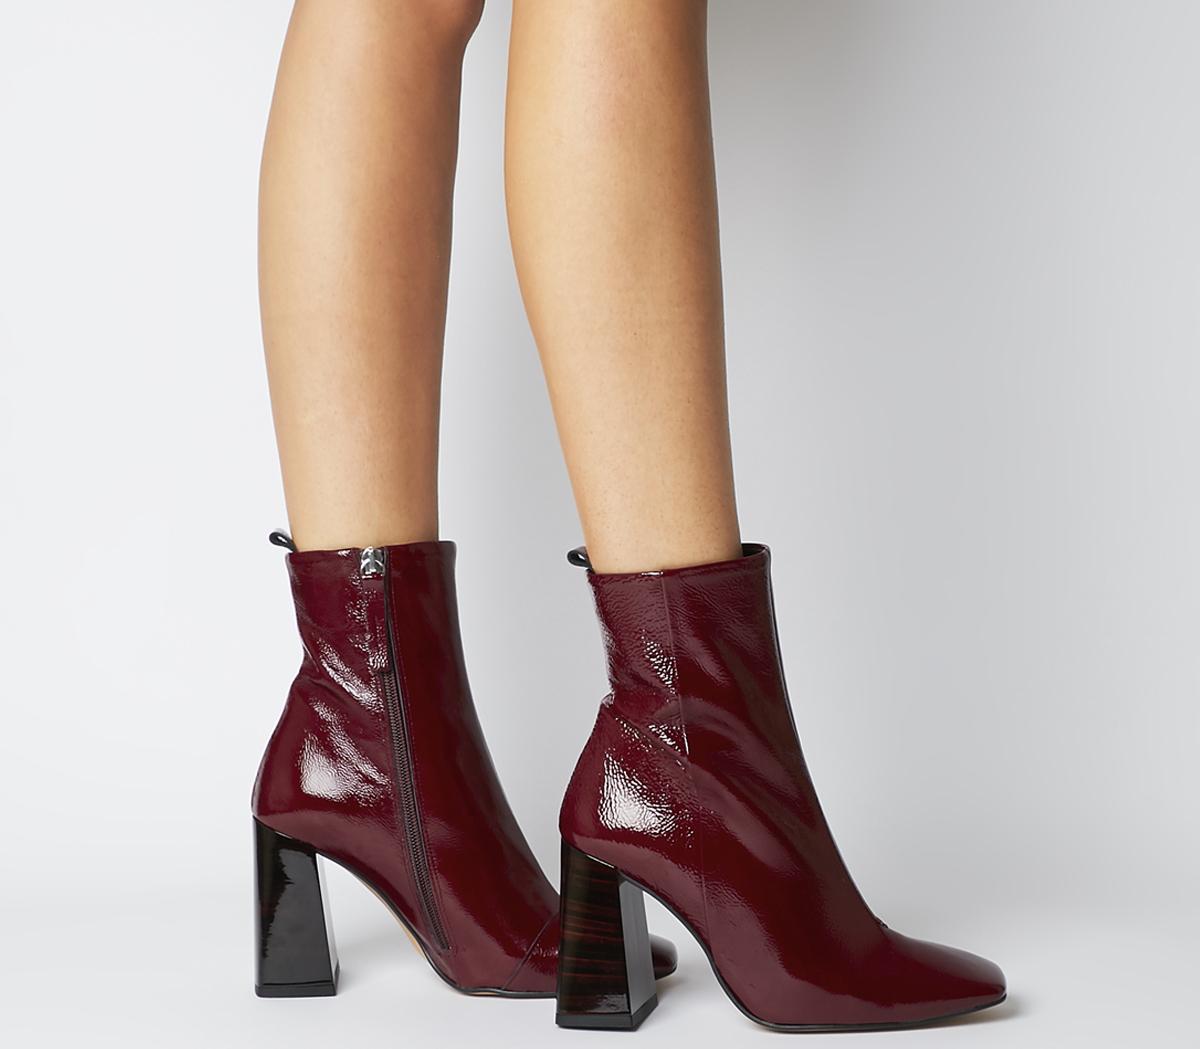 burgundy patent leather ankle boots